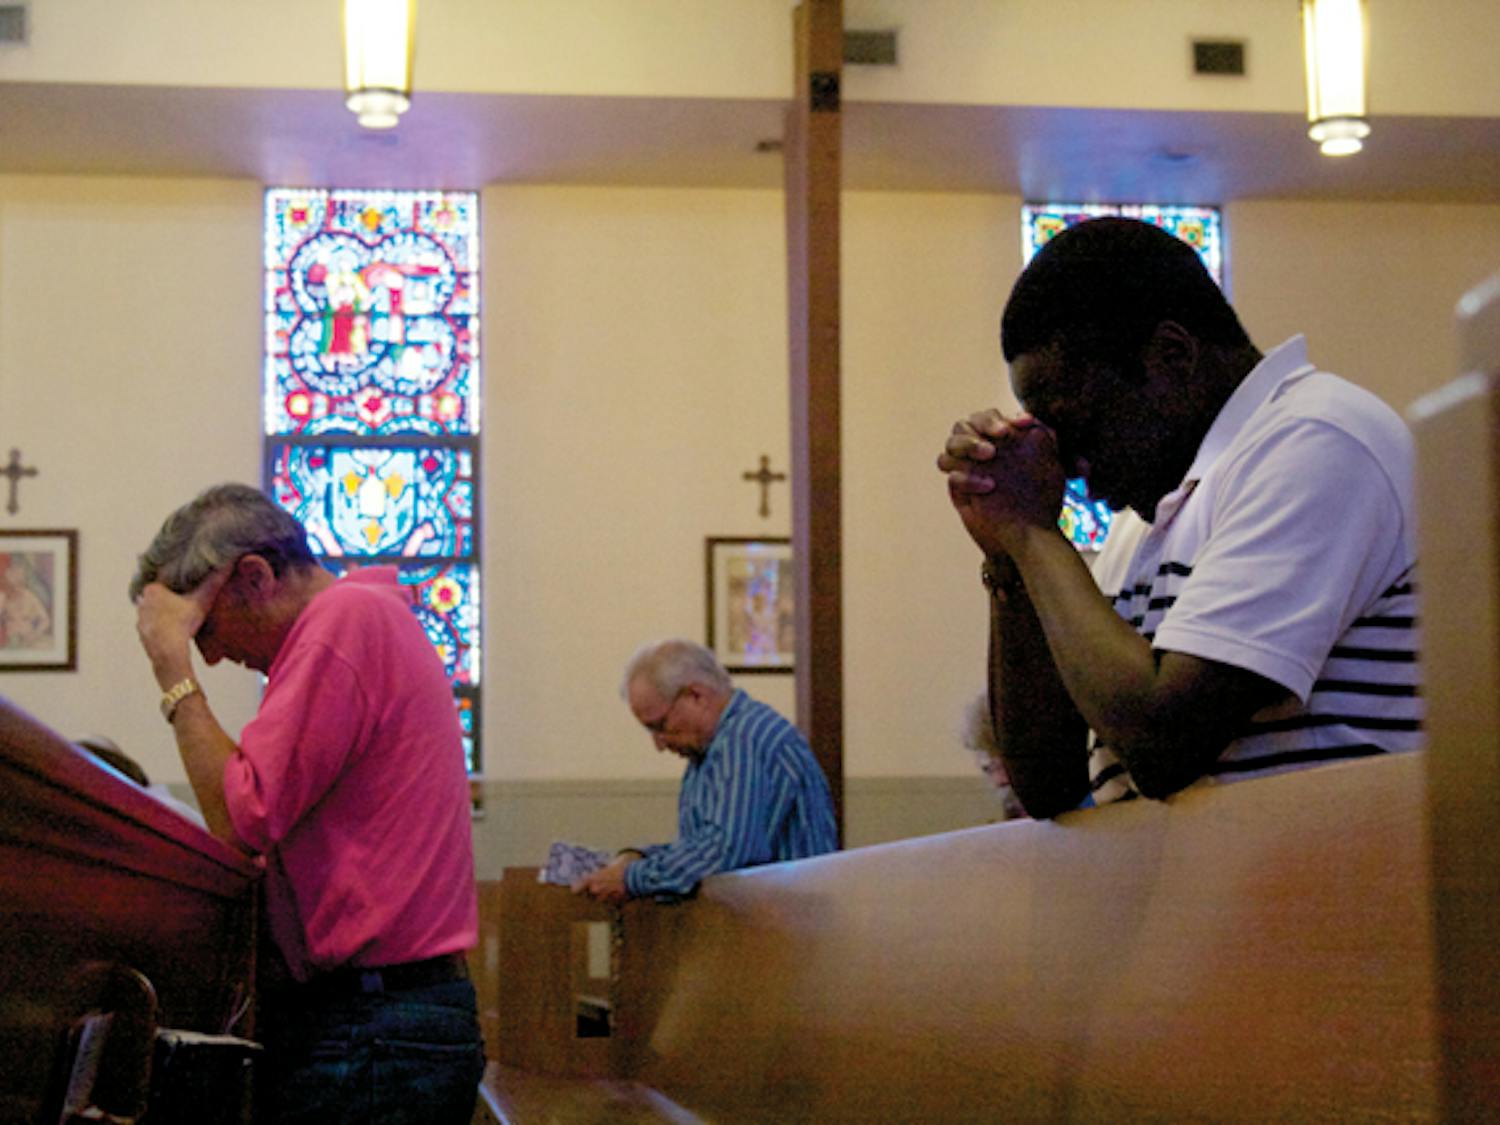 St. Augustine Church members pray before noon Mass. According to a recent study, women who regularly attended religious services were 56 percent more likely to be optimistic and 27 percent less likely to show signs of depression.